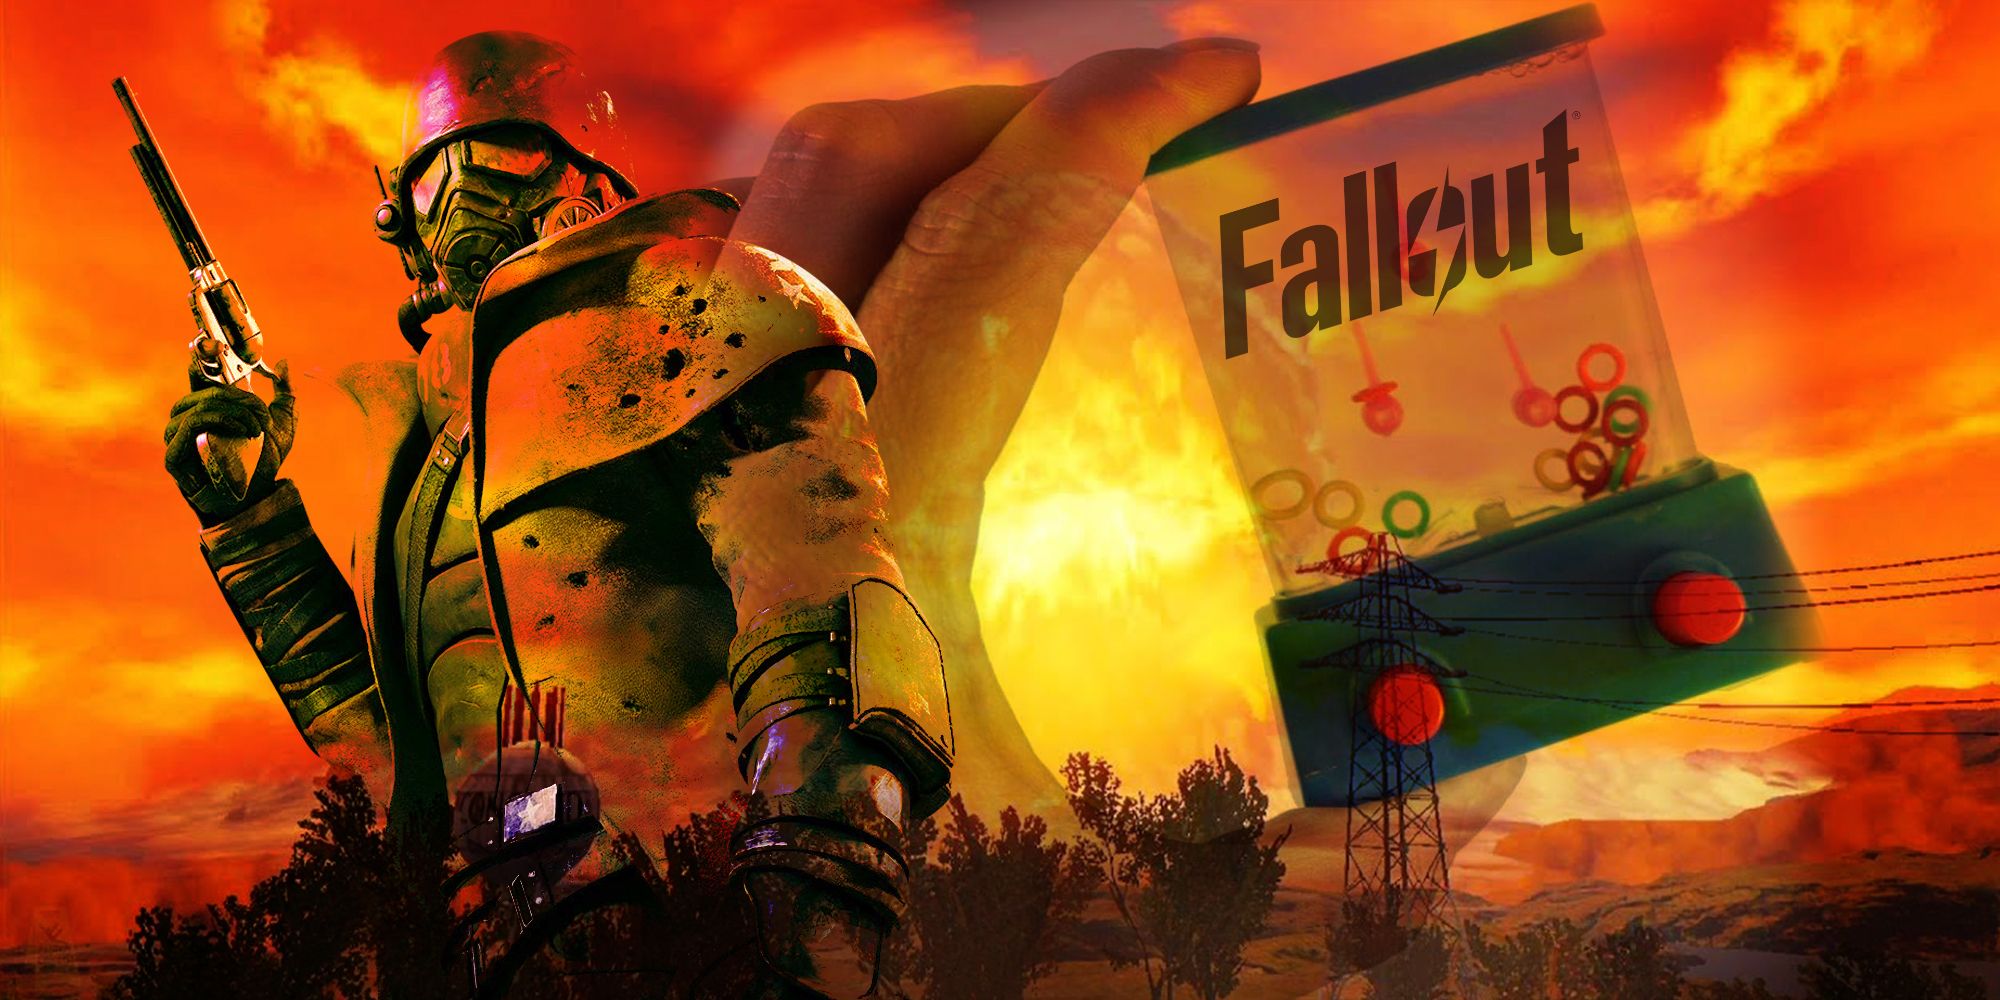 Fallout New Vegas plus a water tank game with hoops labelled Fallout